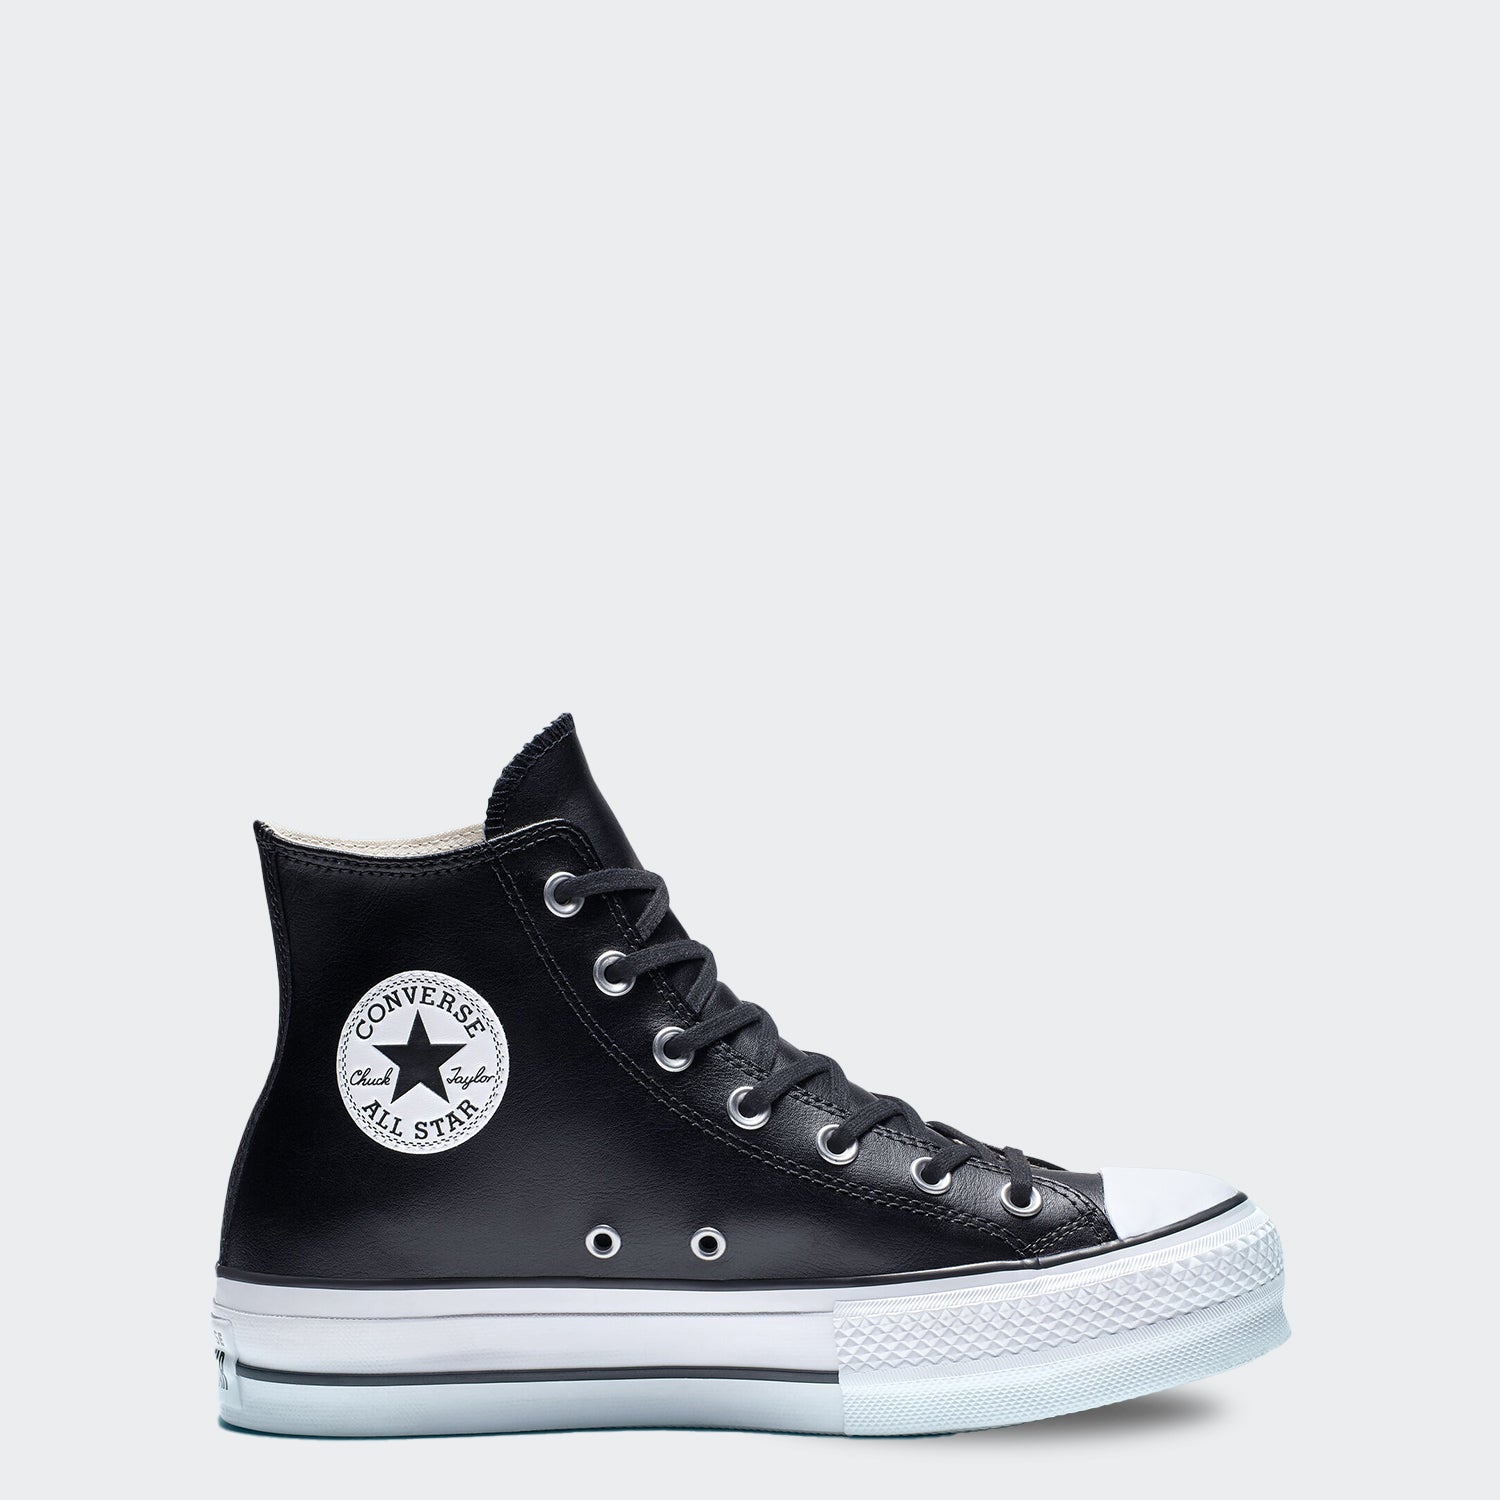 clean leather platform chuck taylor all star size 8